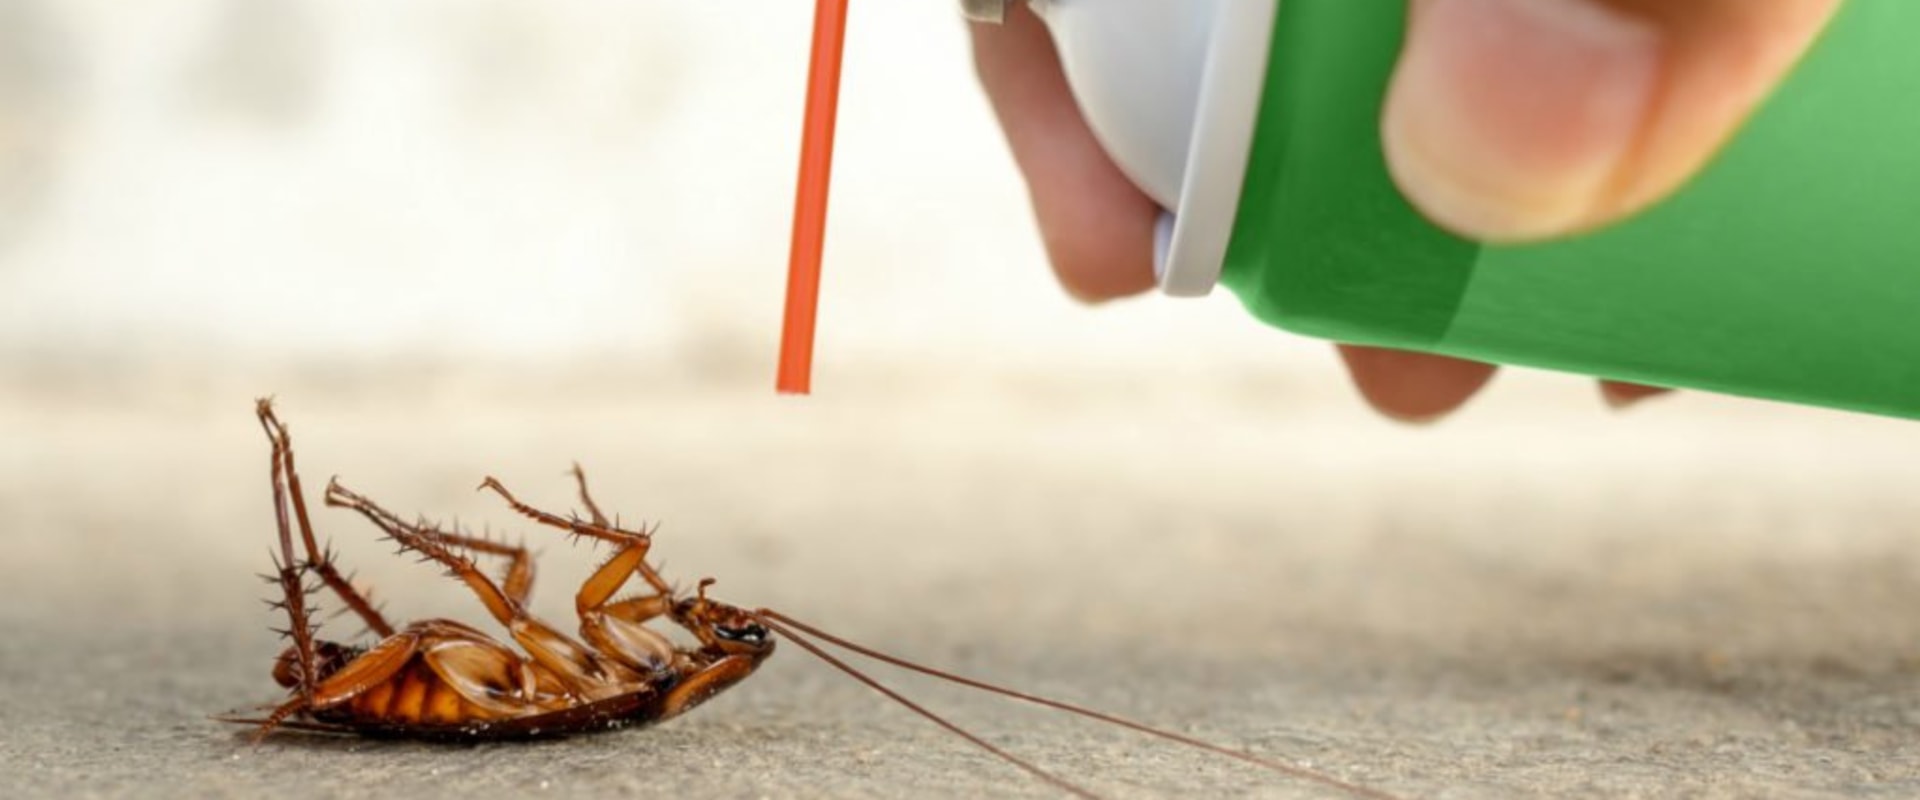 What is the best pesticide for roaches?